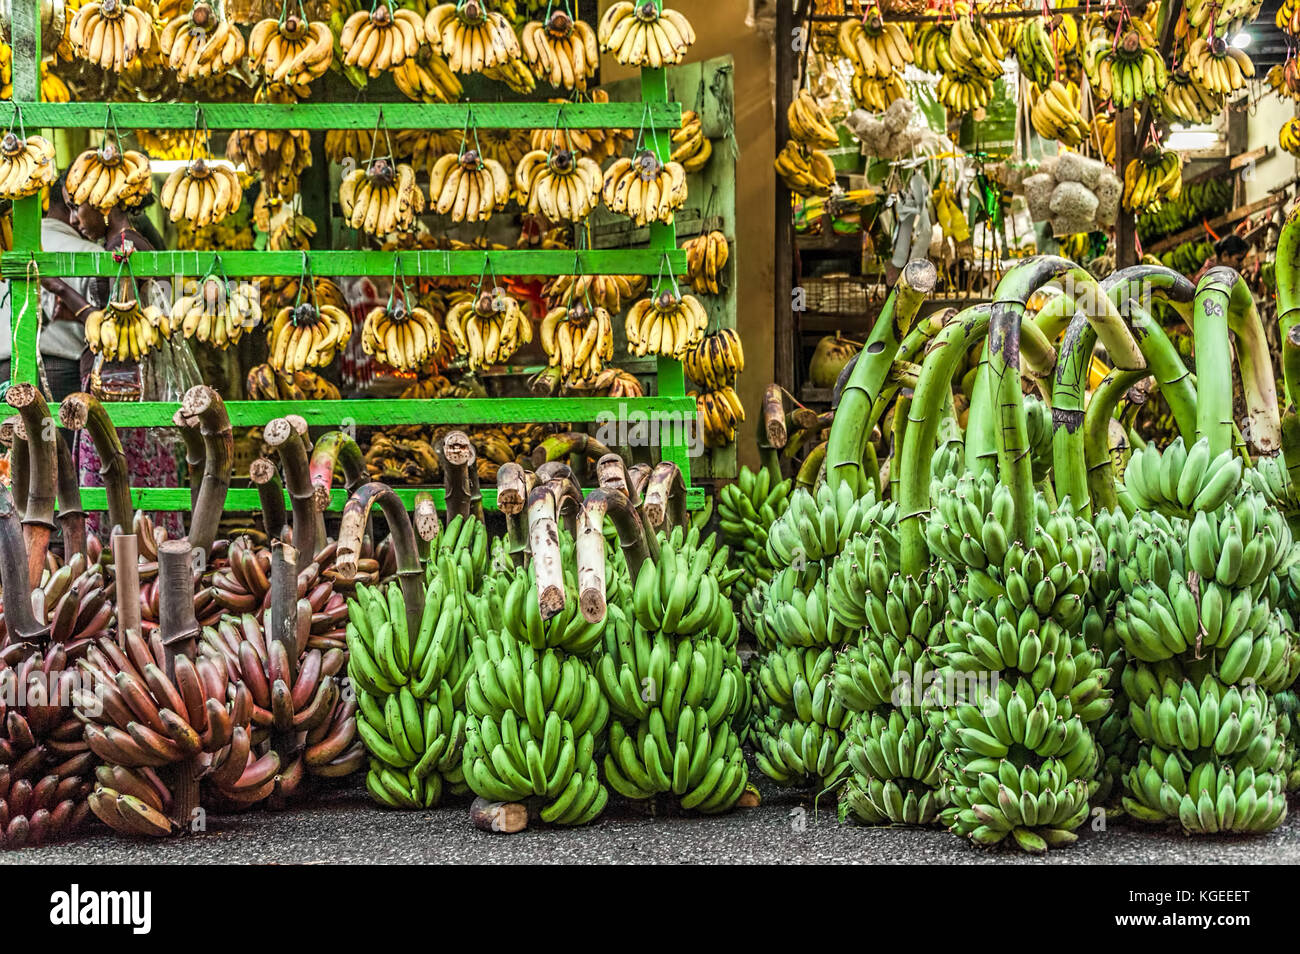 Just Bananas. A store selling only bananas. Many kind of bananas are nicely set and displayed - raw and ripened, red, green, and yellow. Small bunches Stock Photo